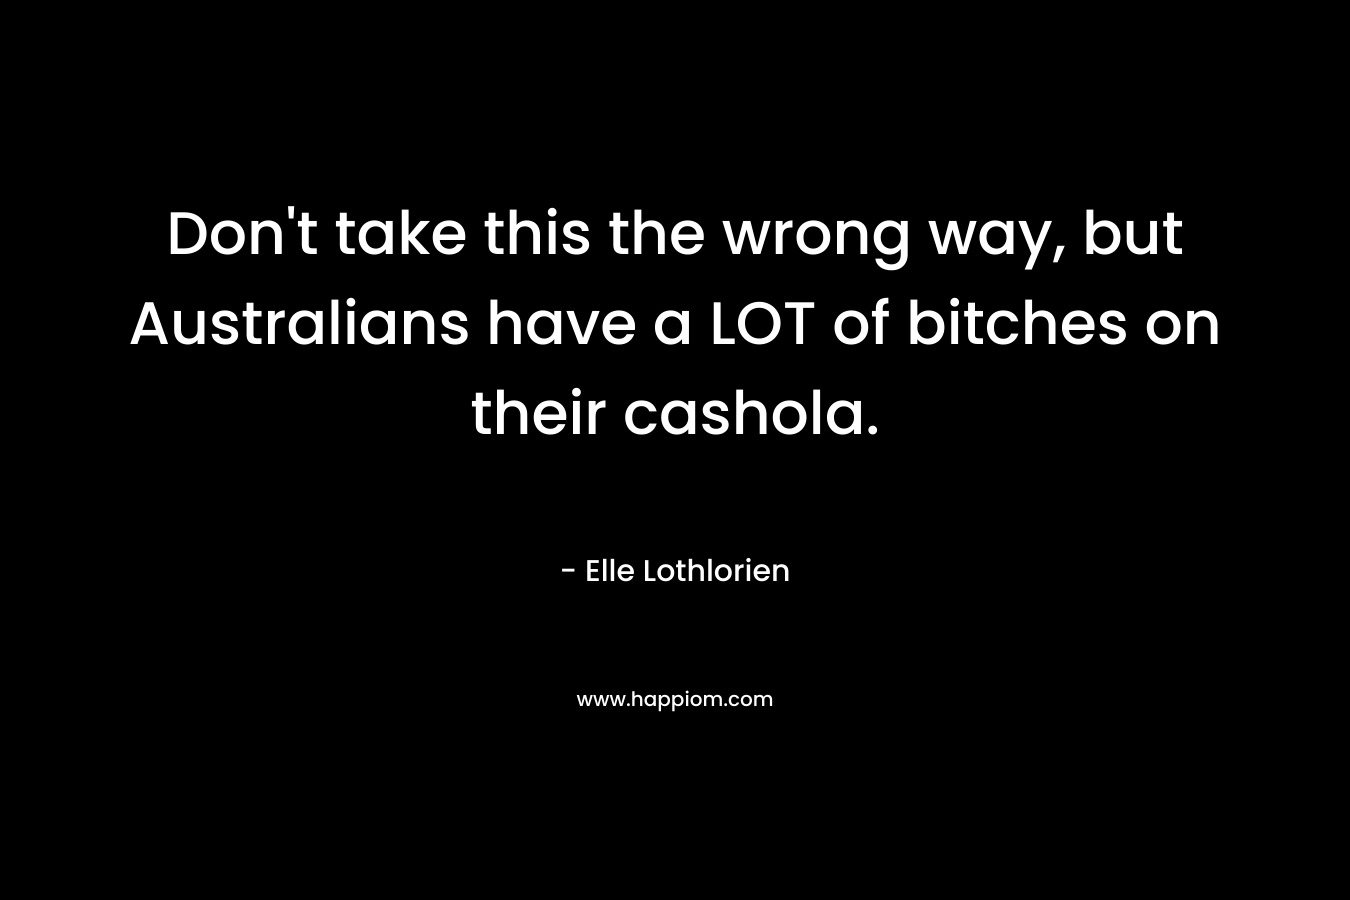 Don’t take this the wrong way, but Australians have a LOT of bitches on their cashola. – Elle Lothlorien